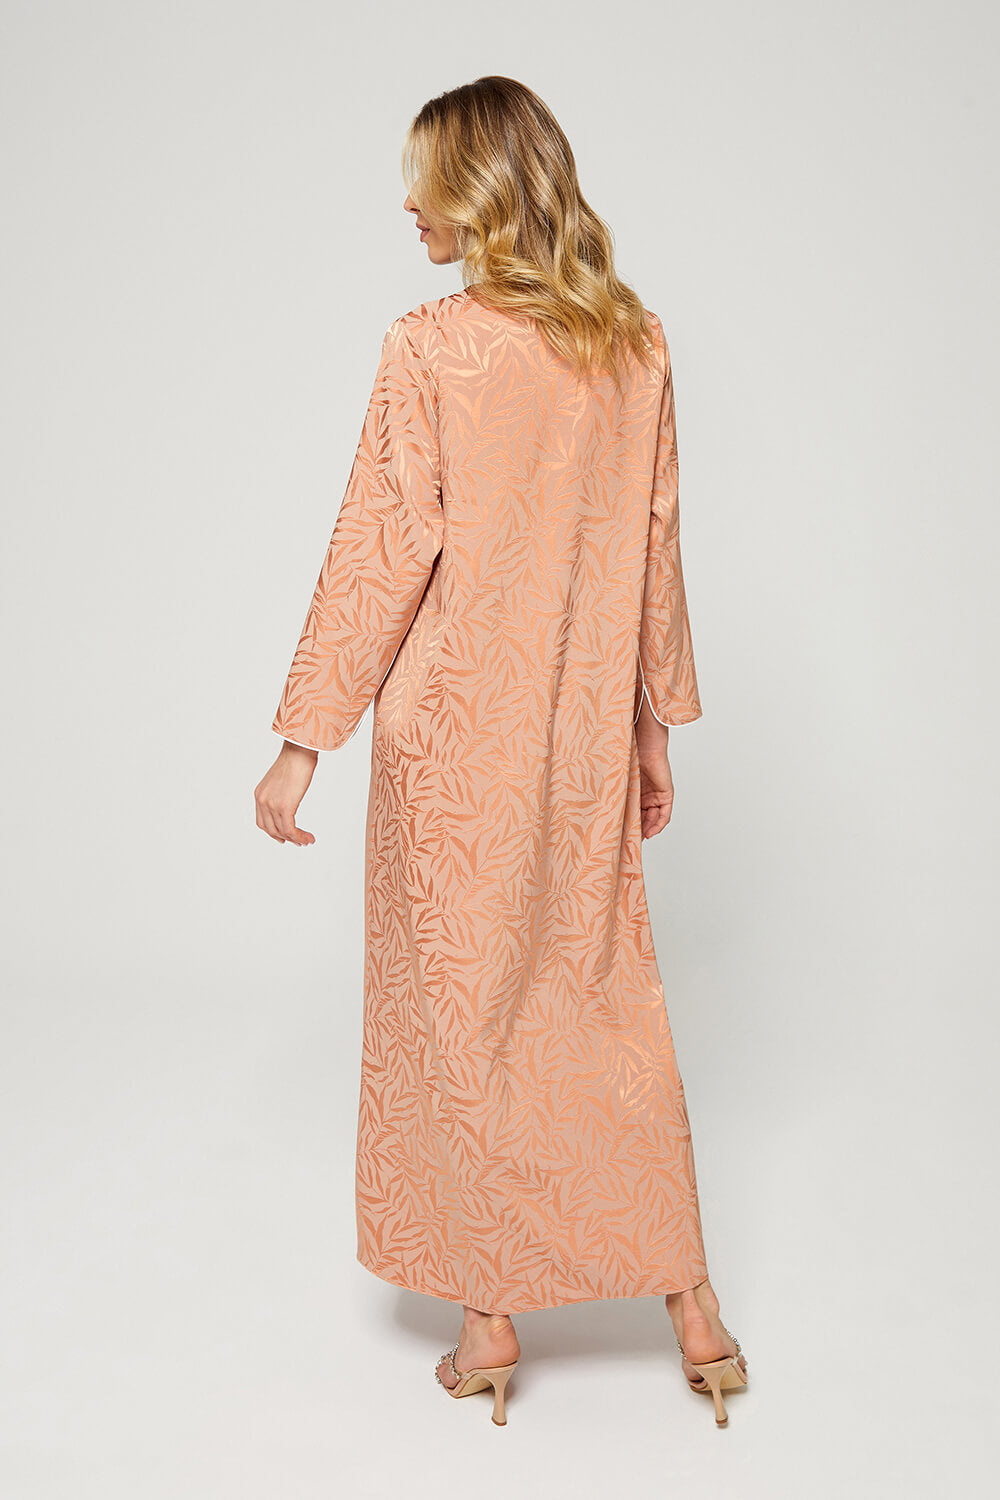 Sienna - Luxury Patterned and Zippered Silk and Viscose Full Length Dress - Dark Nude